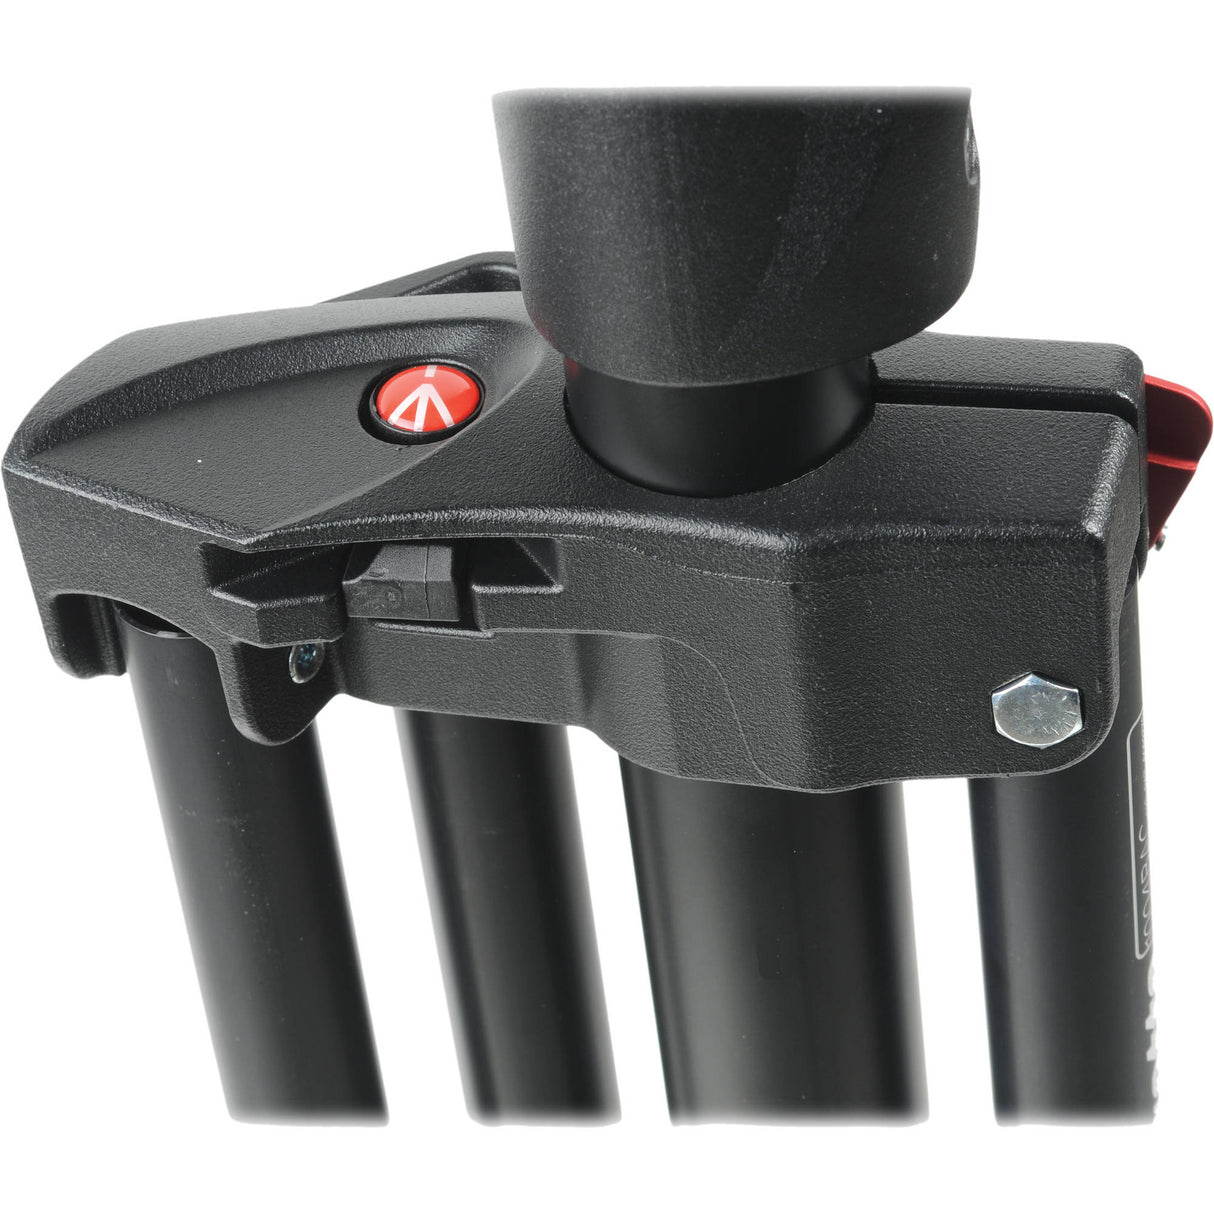 Manfrotto Alu Master Air Cushioned Light Stand Quick Stack 3-Pack (Black, 12')